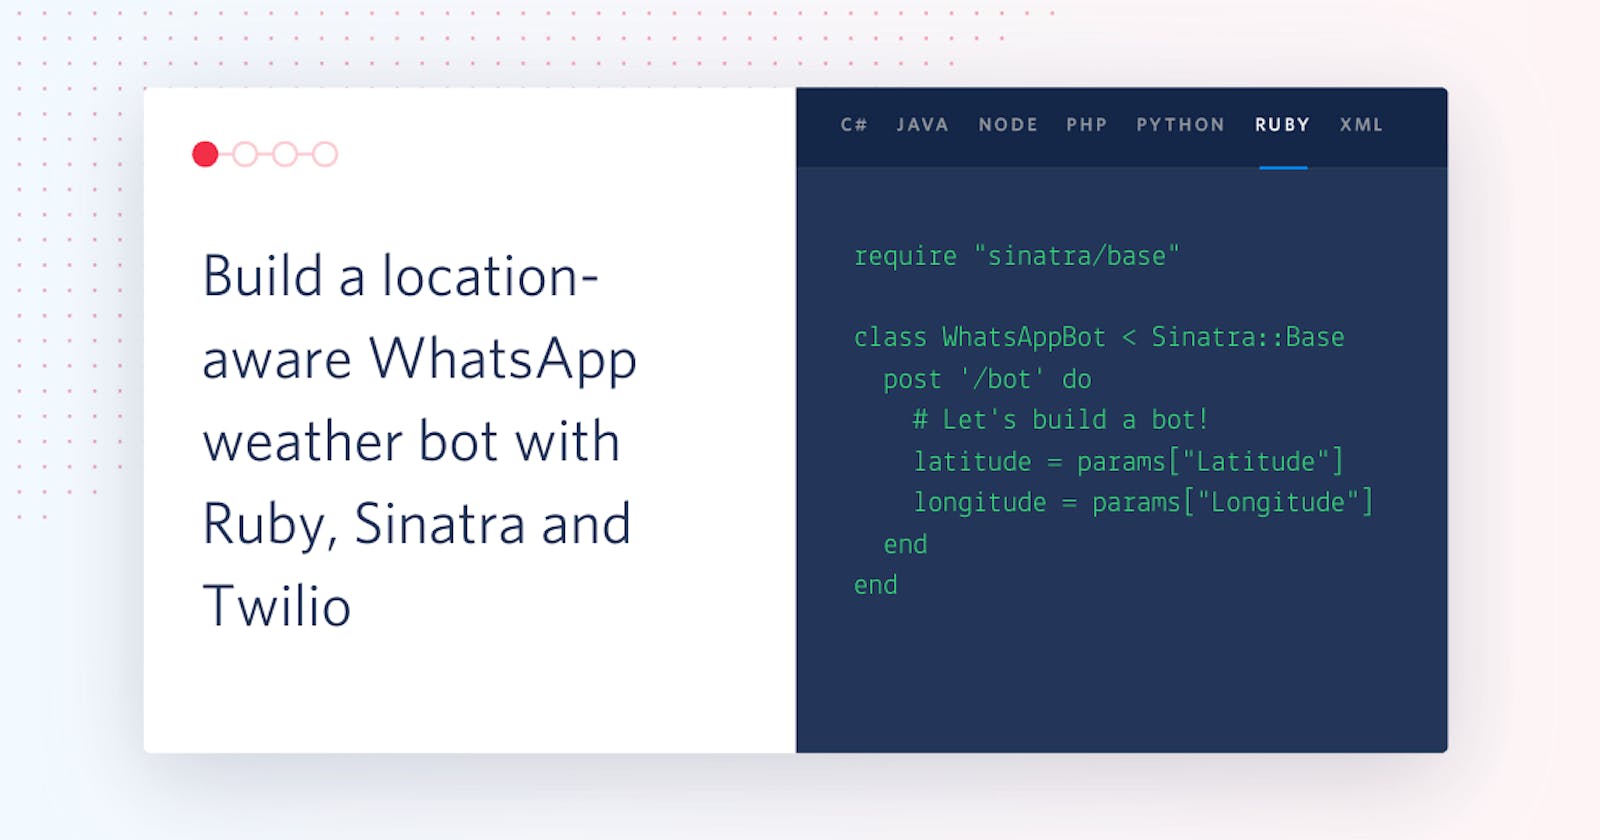 Build a location-aware WhatsApp weather bot with Ruby, Sinatra and Twilio